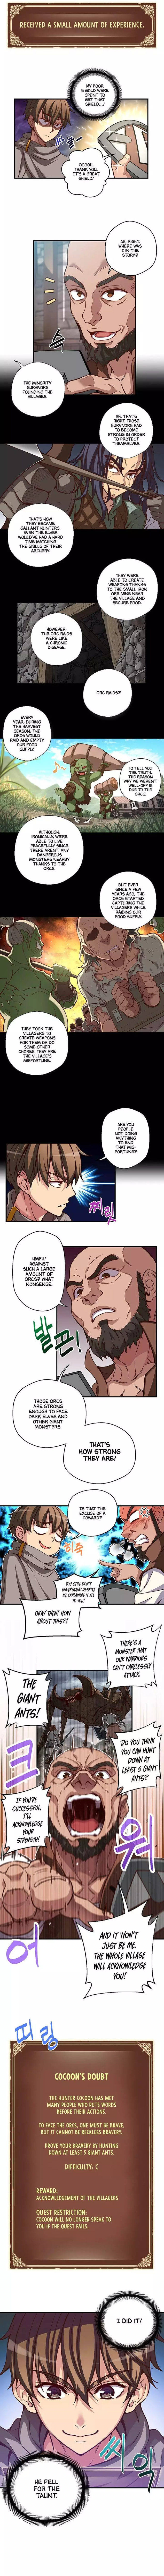 The Legendary Moonlight Sculptor - 119 page 08